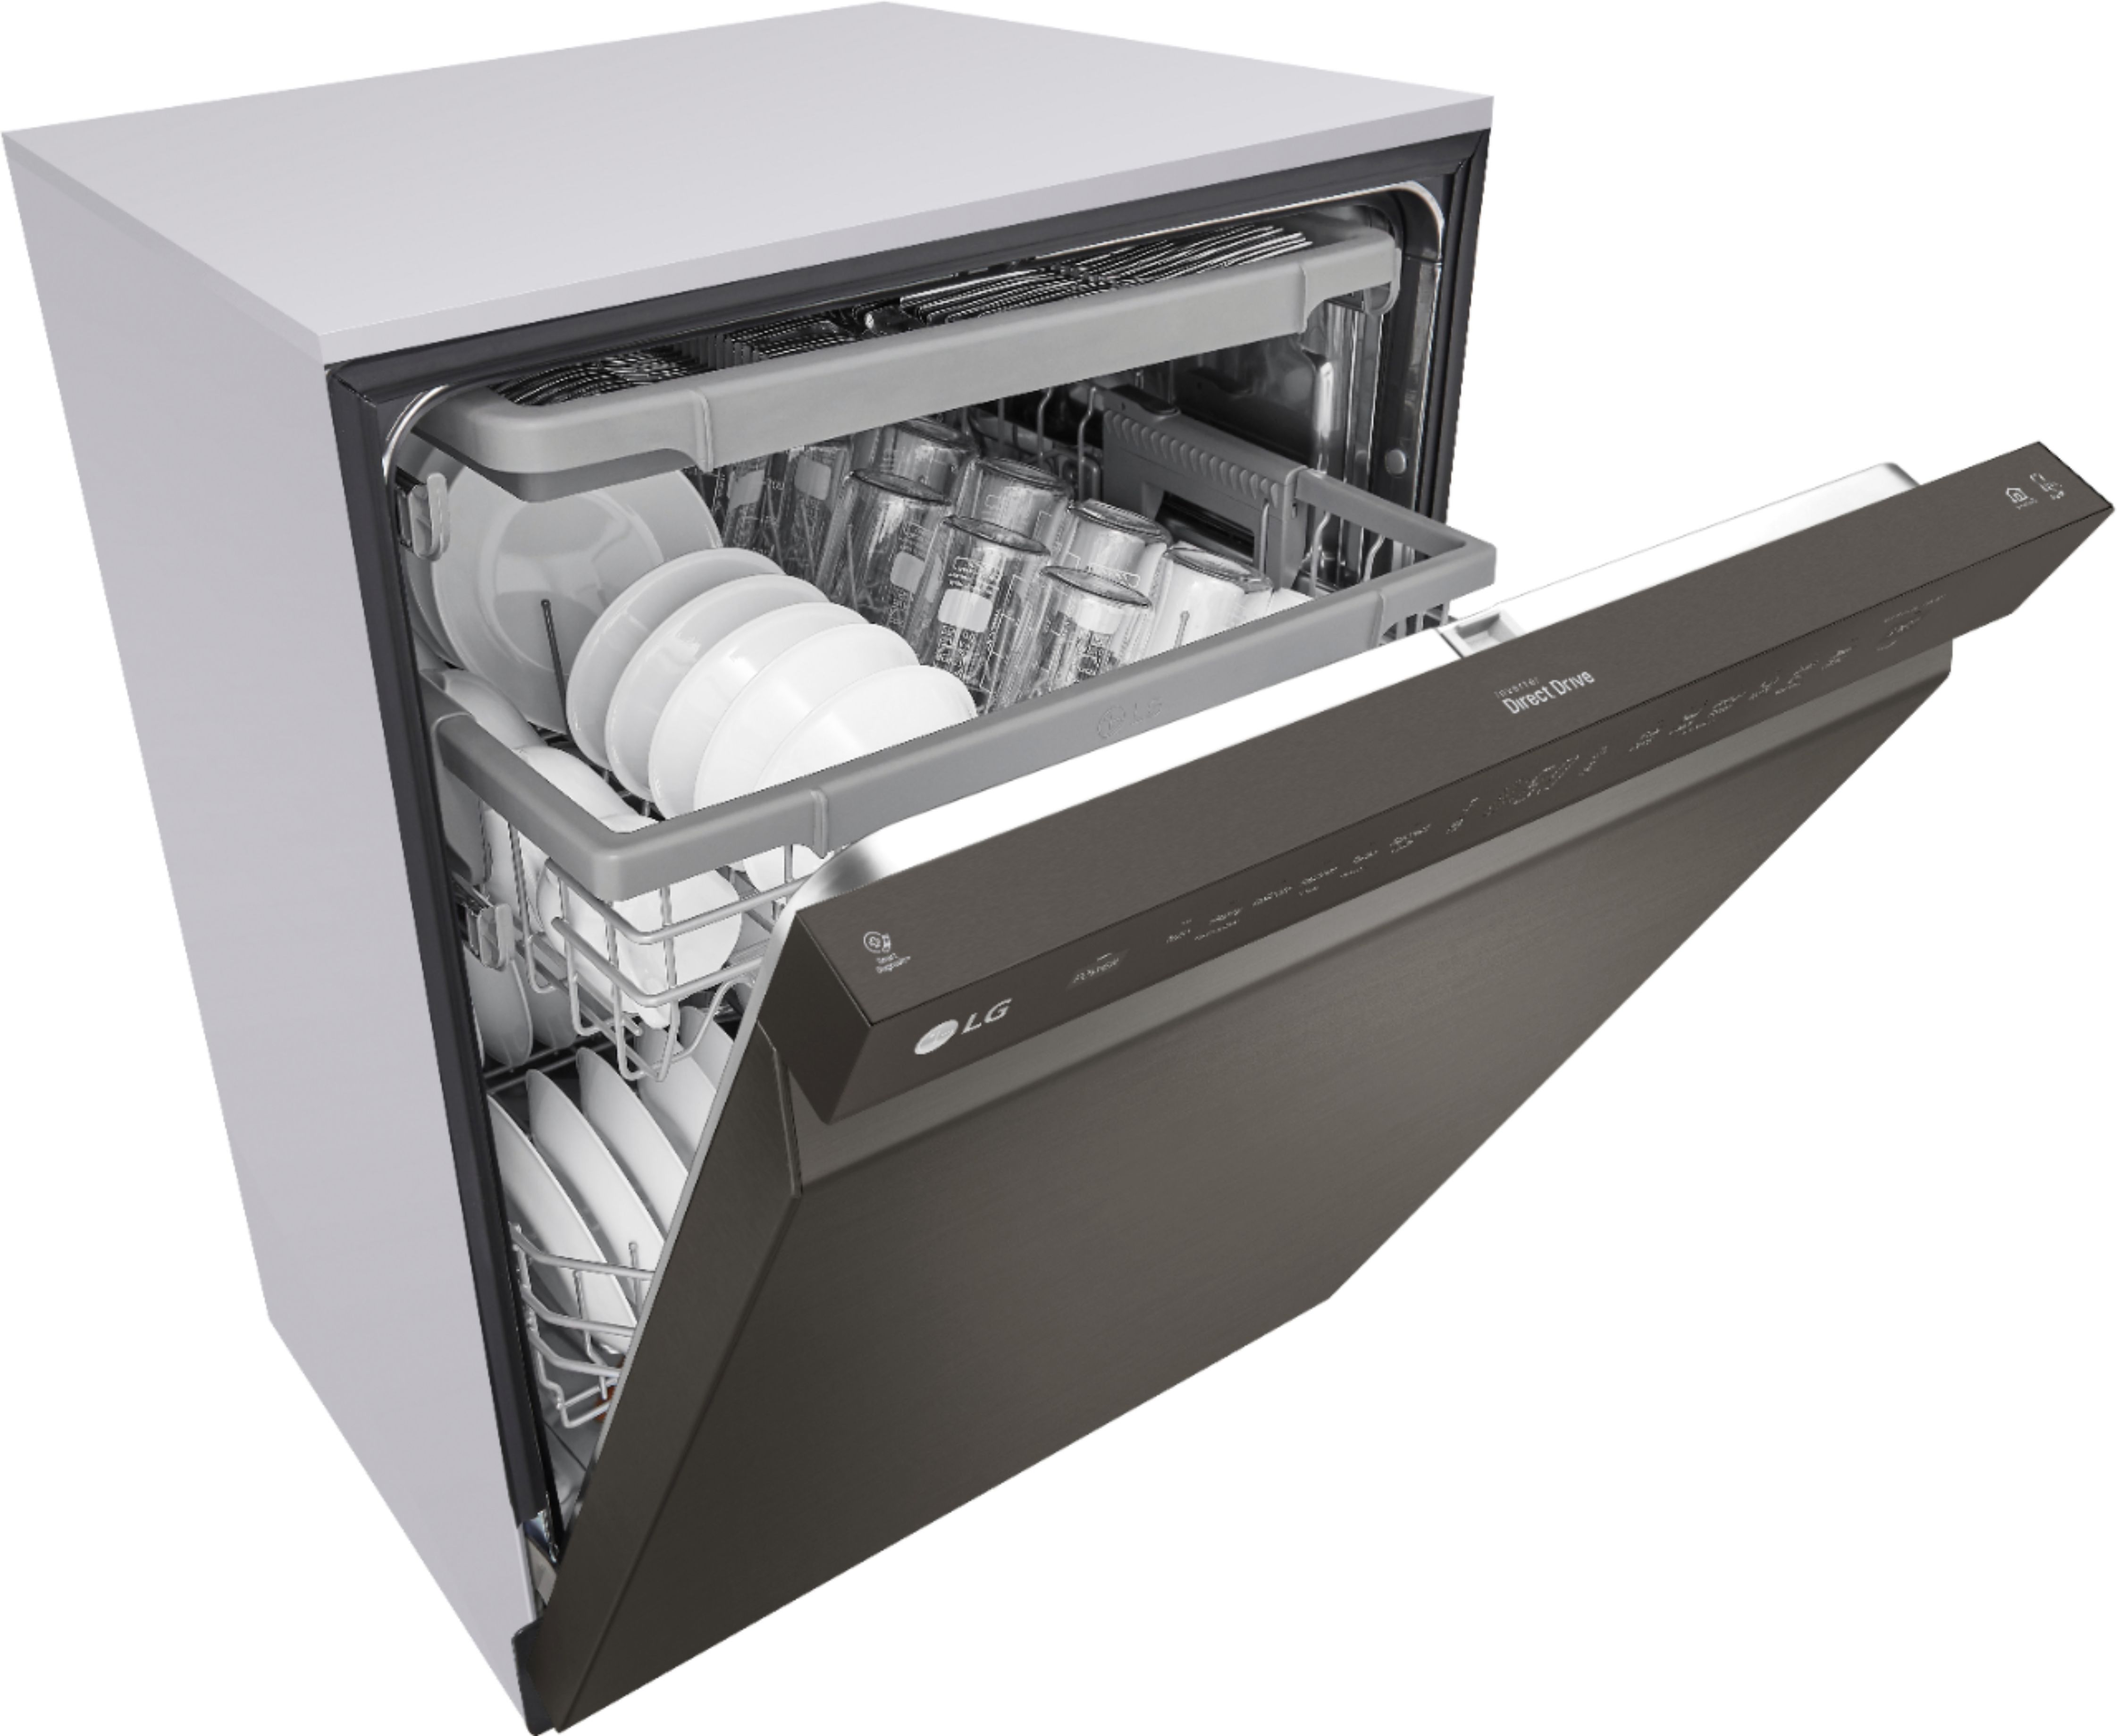 Angle View: Bosch - 100 Series 24" Front Control Built-In Dishwasher with Hybrid Stainless Steel Tub - Stainless steel